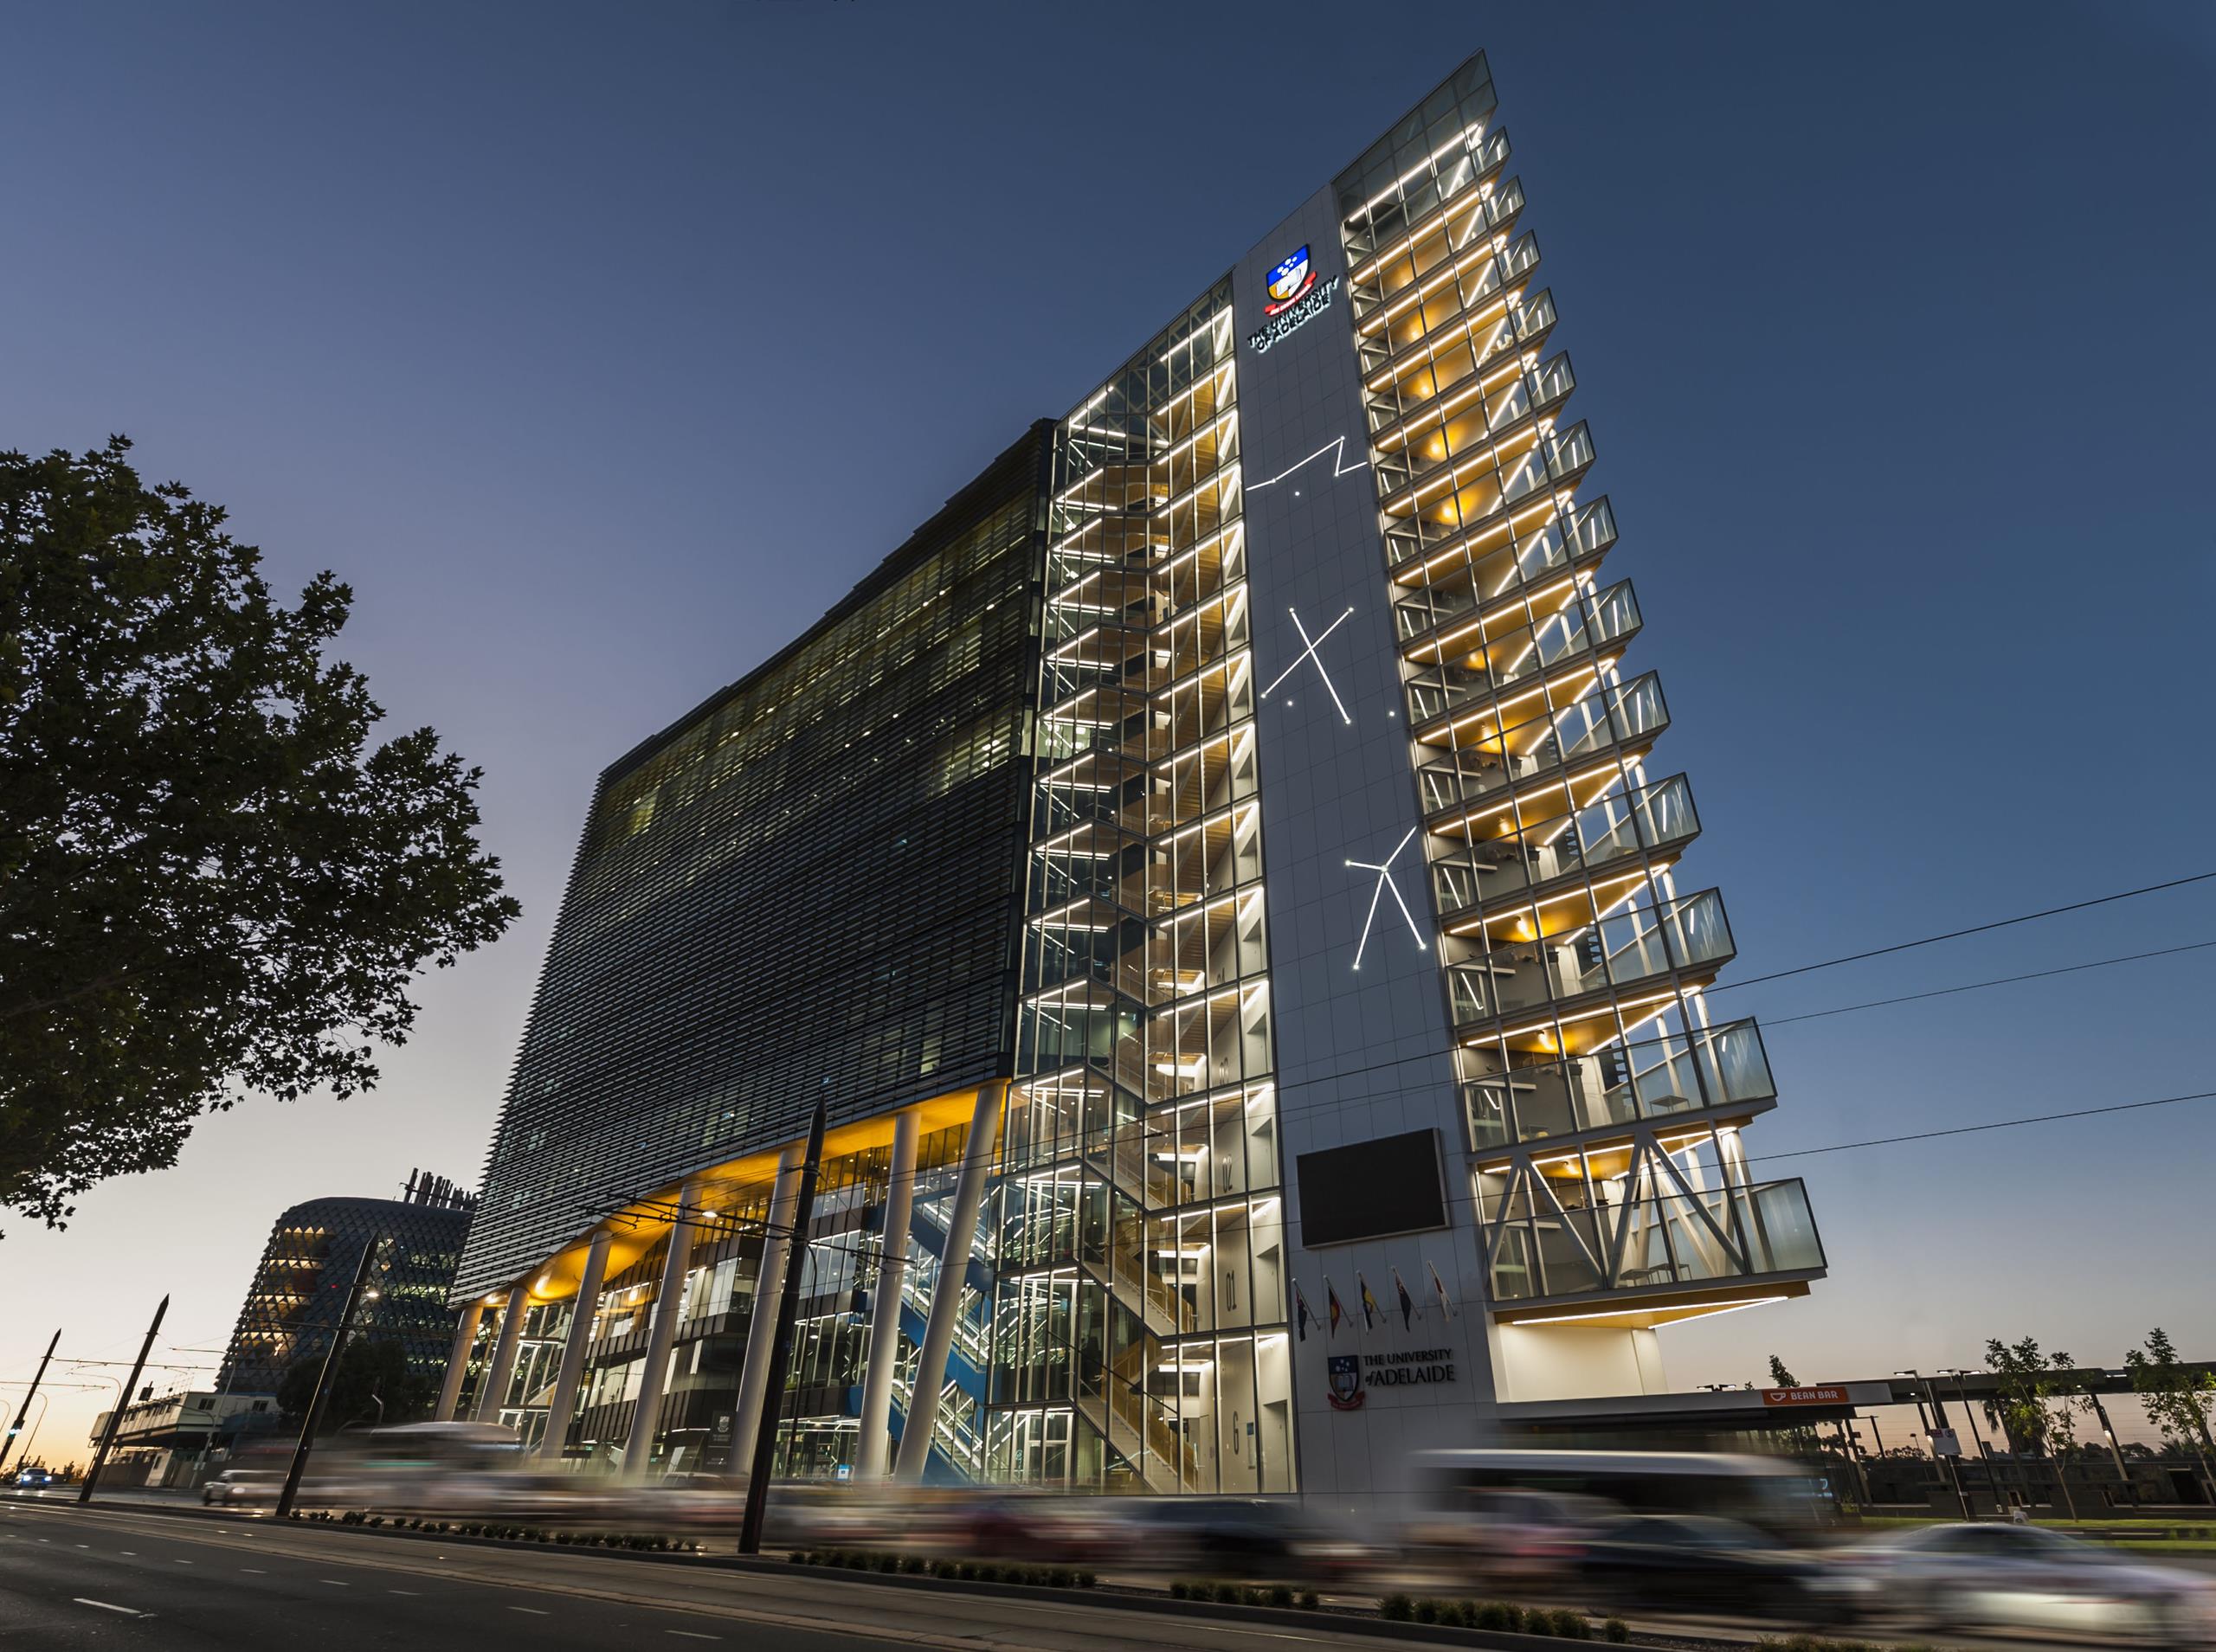 Adelaide Health and Medical Sciences (AHMS) building at dusk